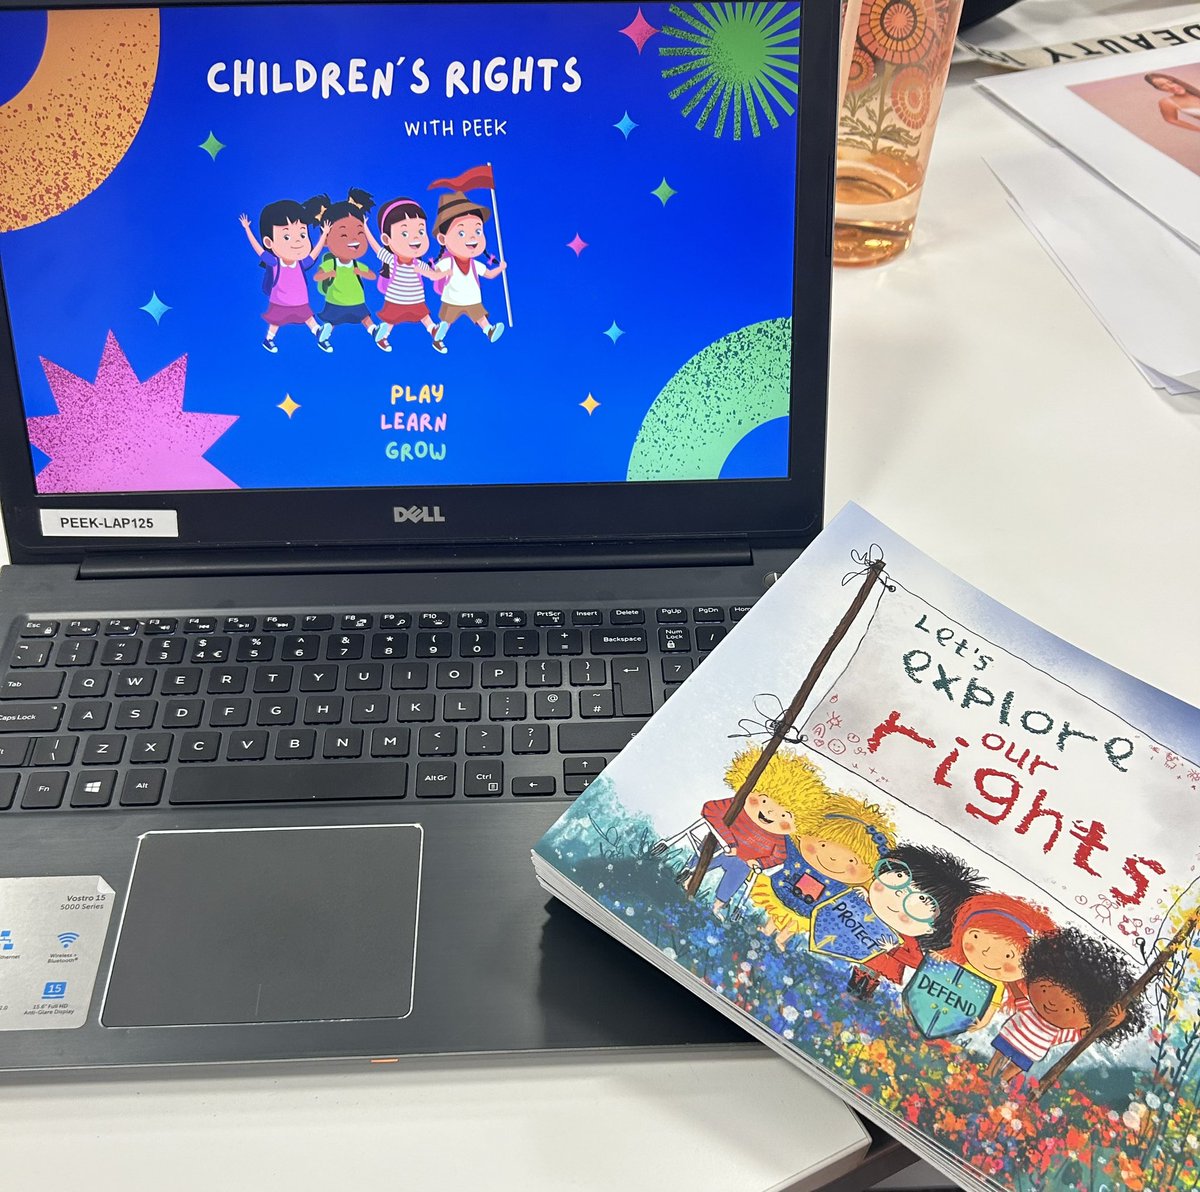 Exciting things are coming @DalmarnockPS 👀 We can’t wait to work with the P3’s and P3/4’s to empower them and promote Children’s Rights this term! 💪🏻✨ @corrinacampbell @PEEK_project_